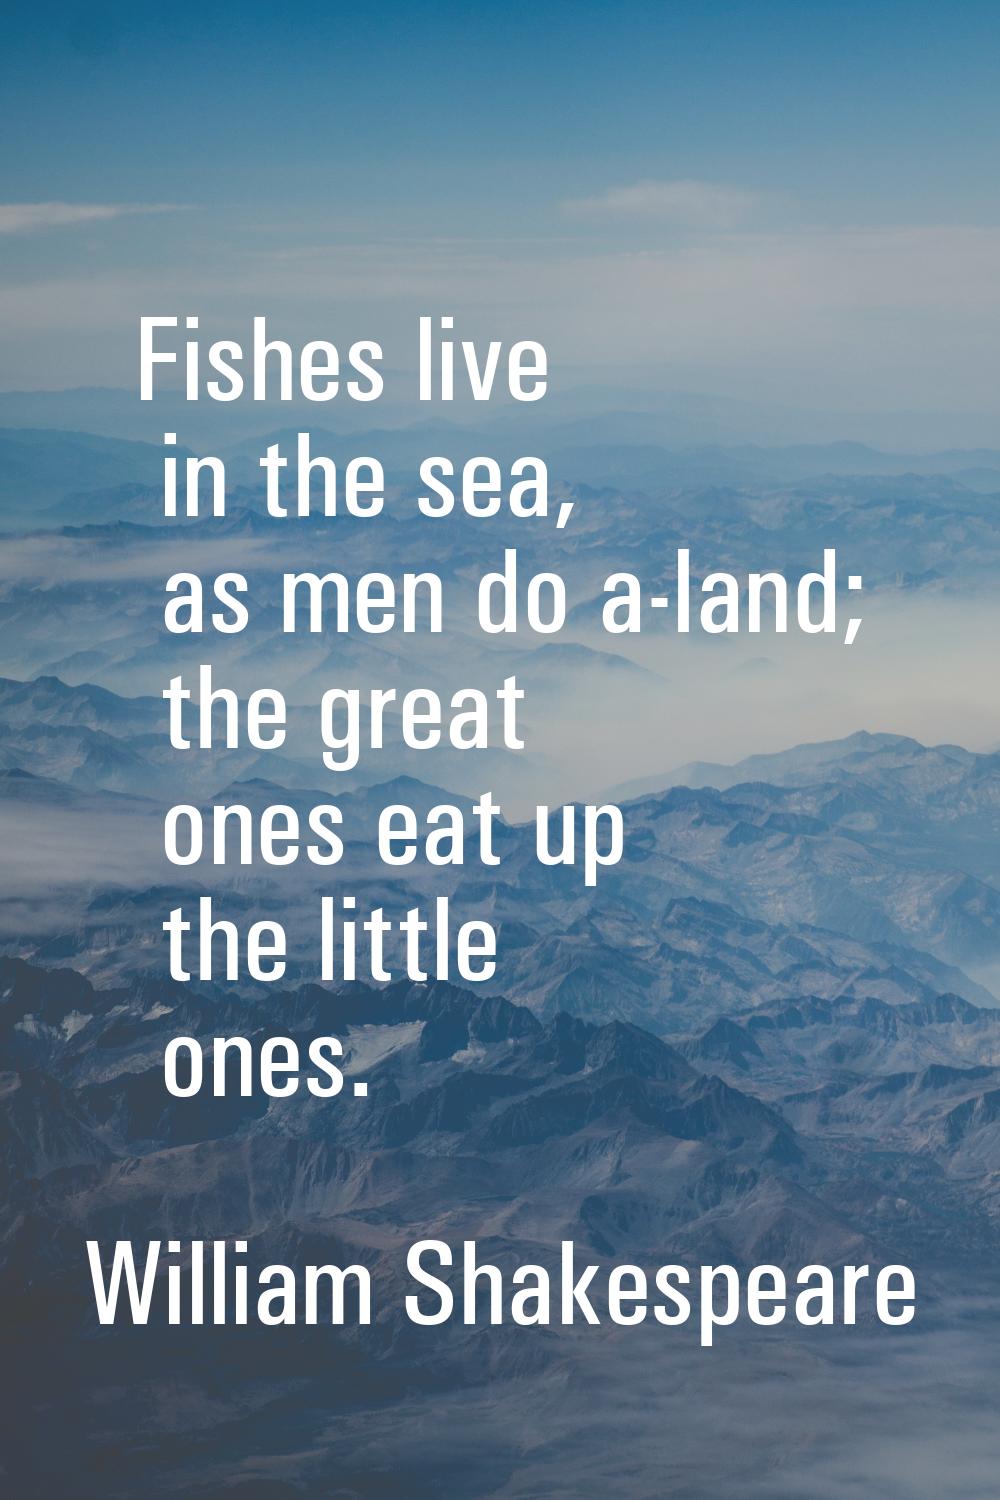 Fishes live in the sea, as men do a-land; the great ones eat up the little ones.